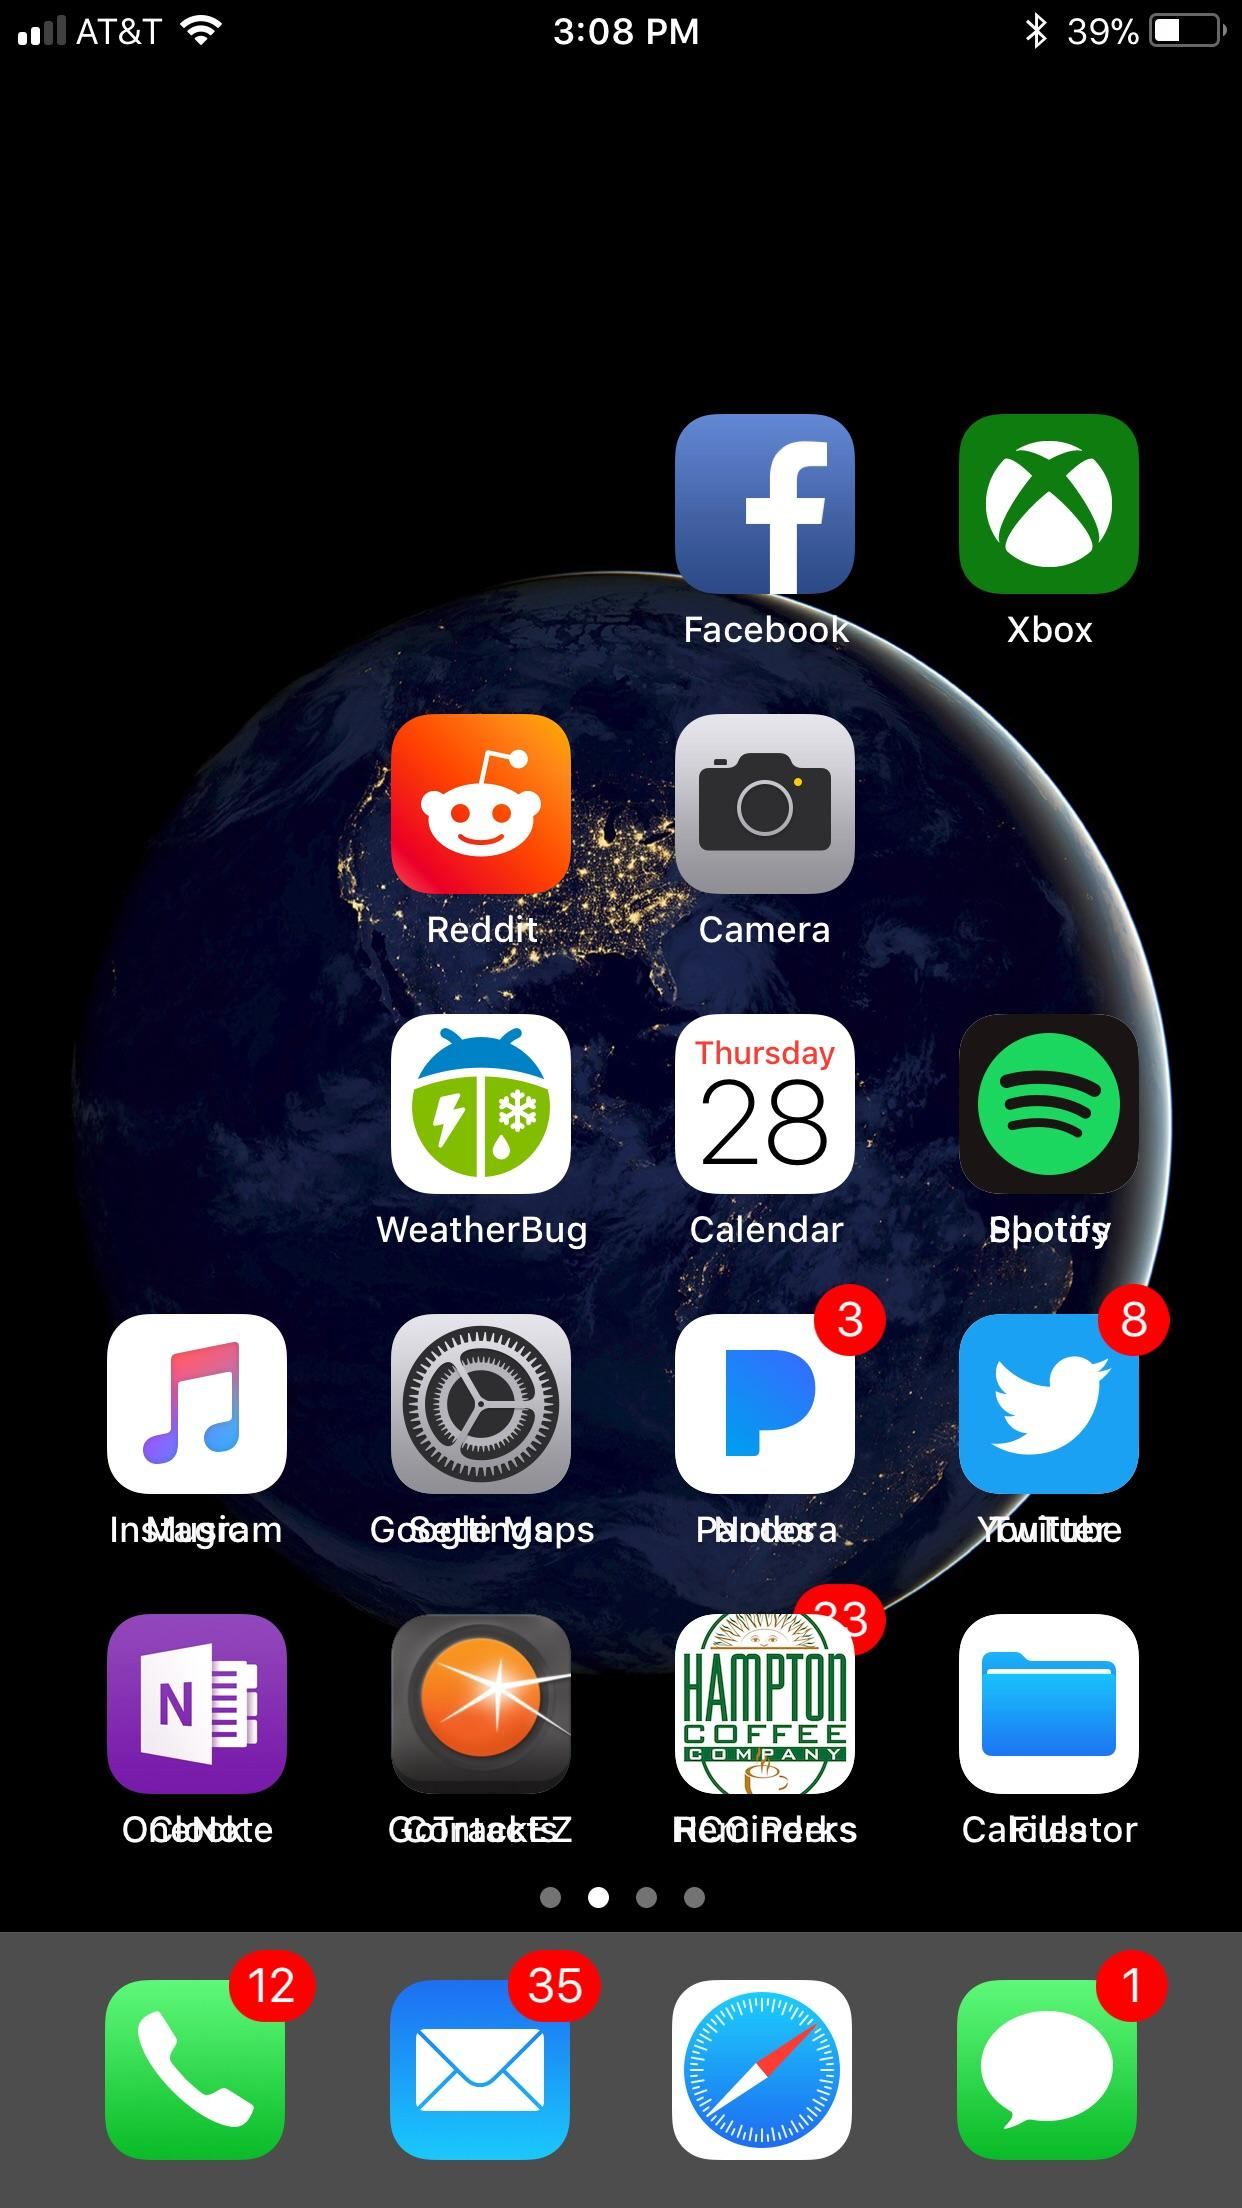 Icons Missing On Ios 11.1 : Iphone for Calendar Icon Missing On Iphone